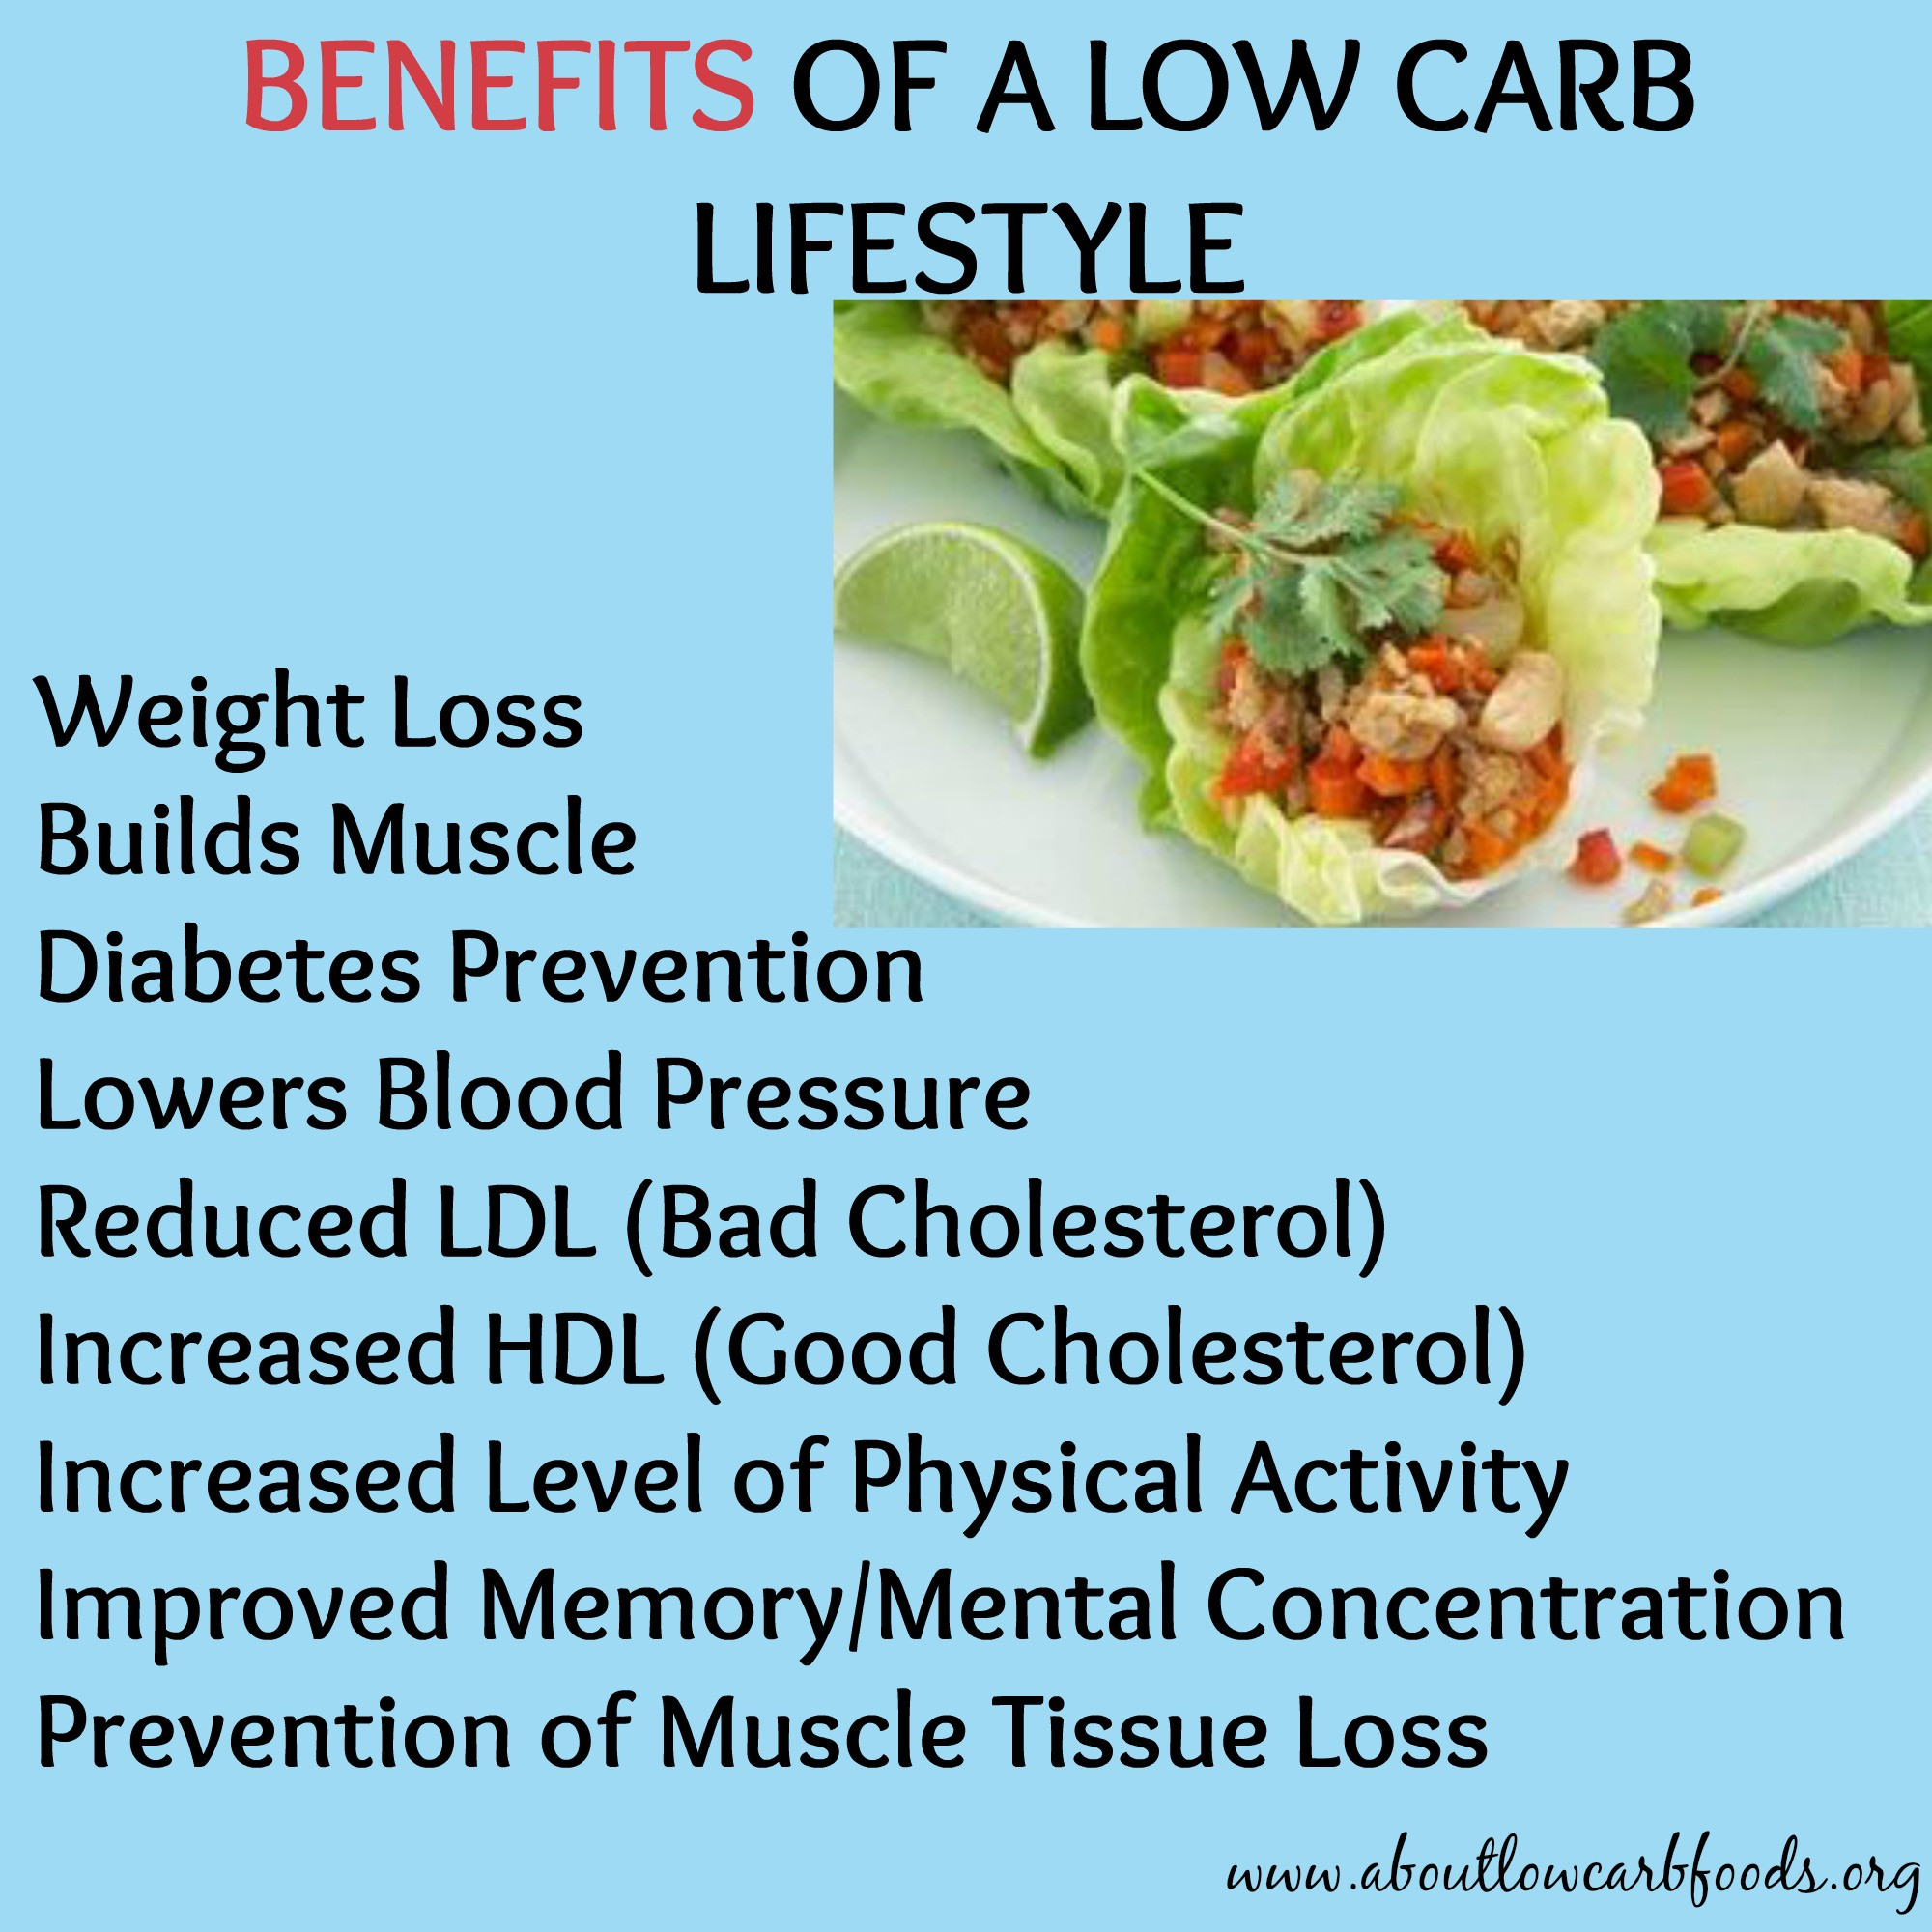 Low Carbohydrate Diet Food How Does A Low Carb Diet Work A Detailed Review About